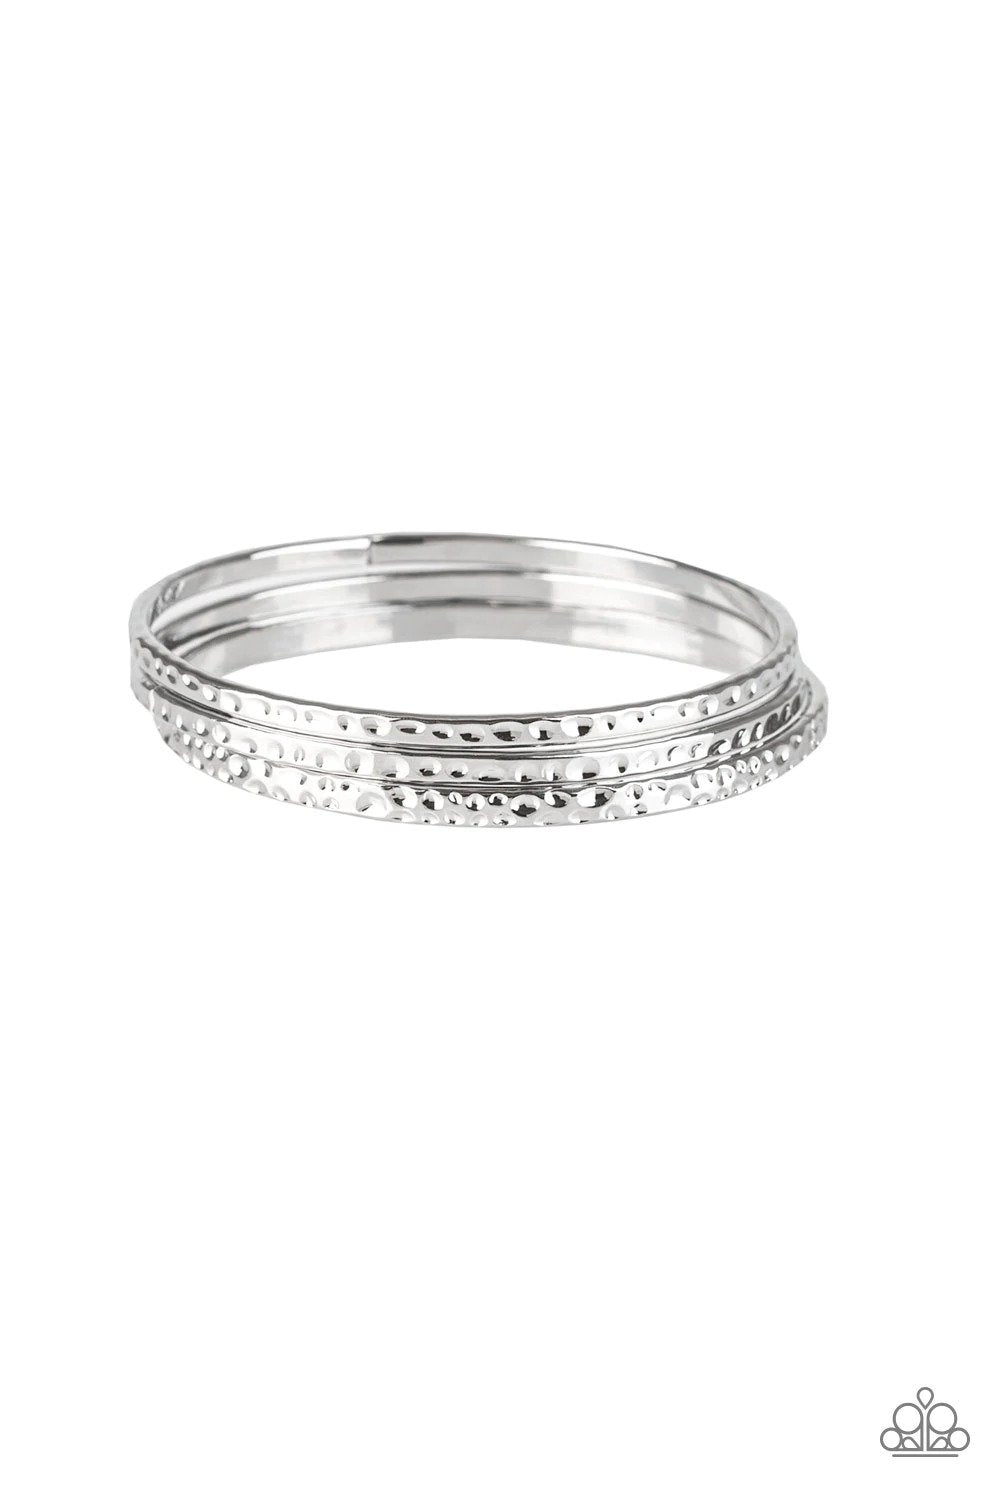 Casually Couture Silver Bangle Bracelet - Paparazzi Accessories- lightbox - CarasShop.com - $5 Jewelry by Cara Jewels